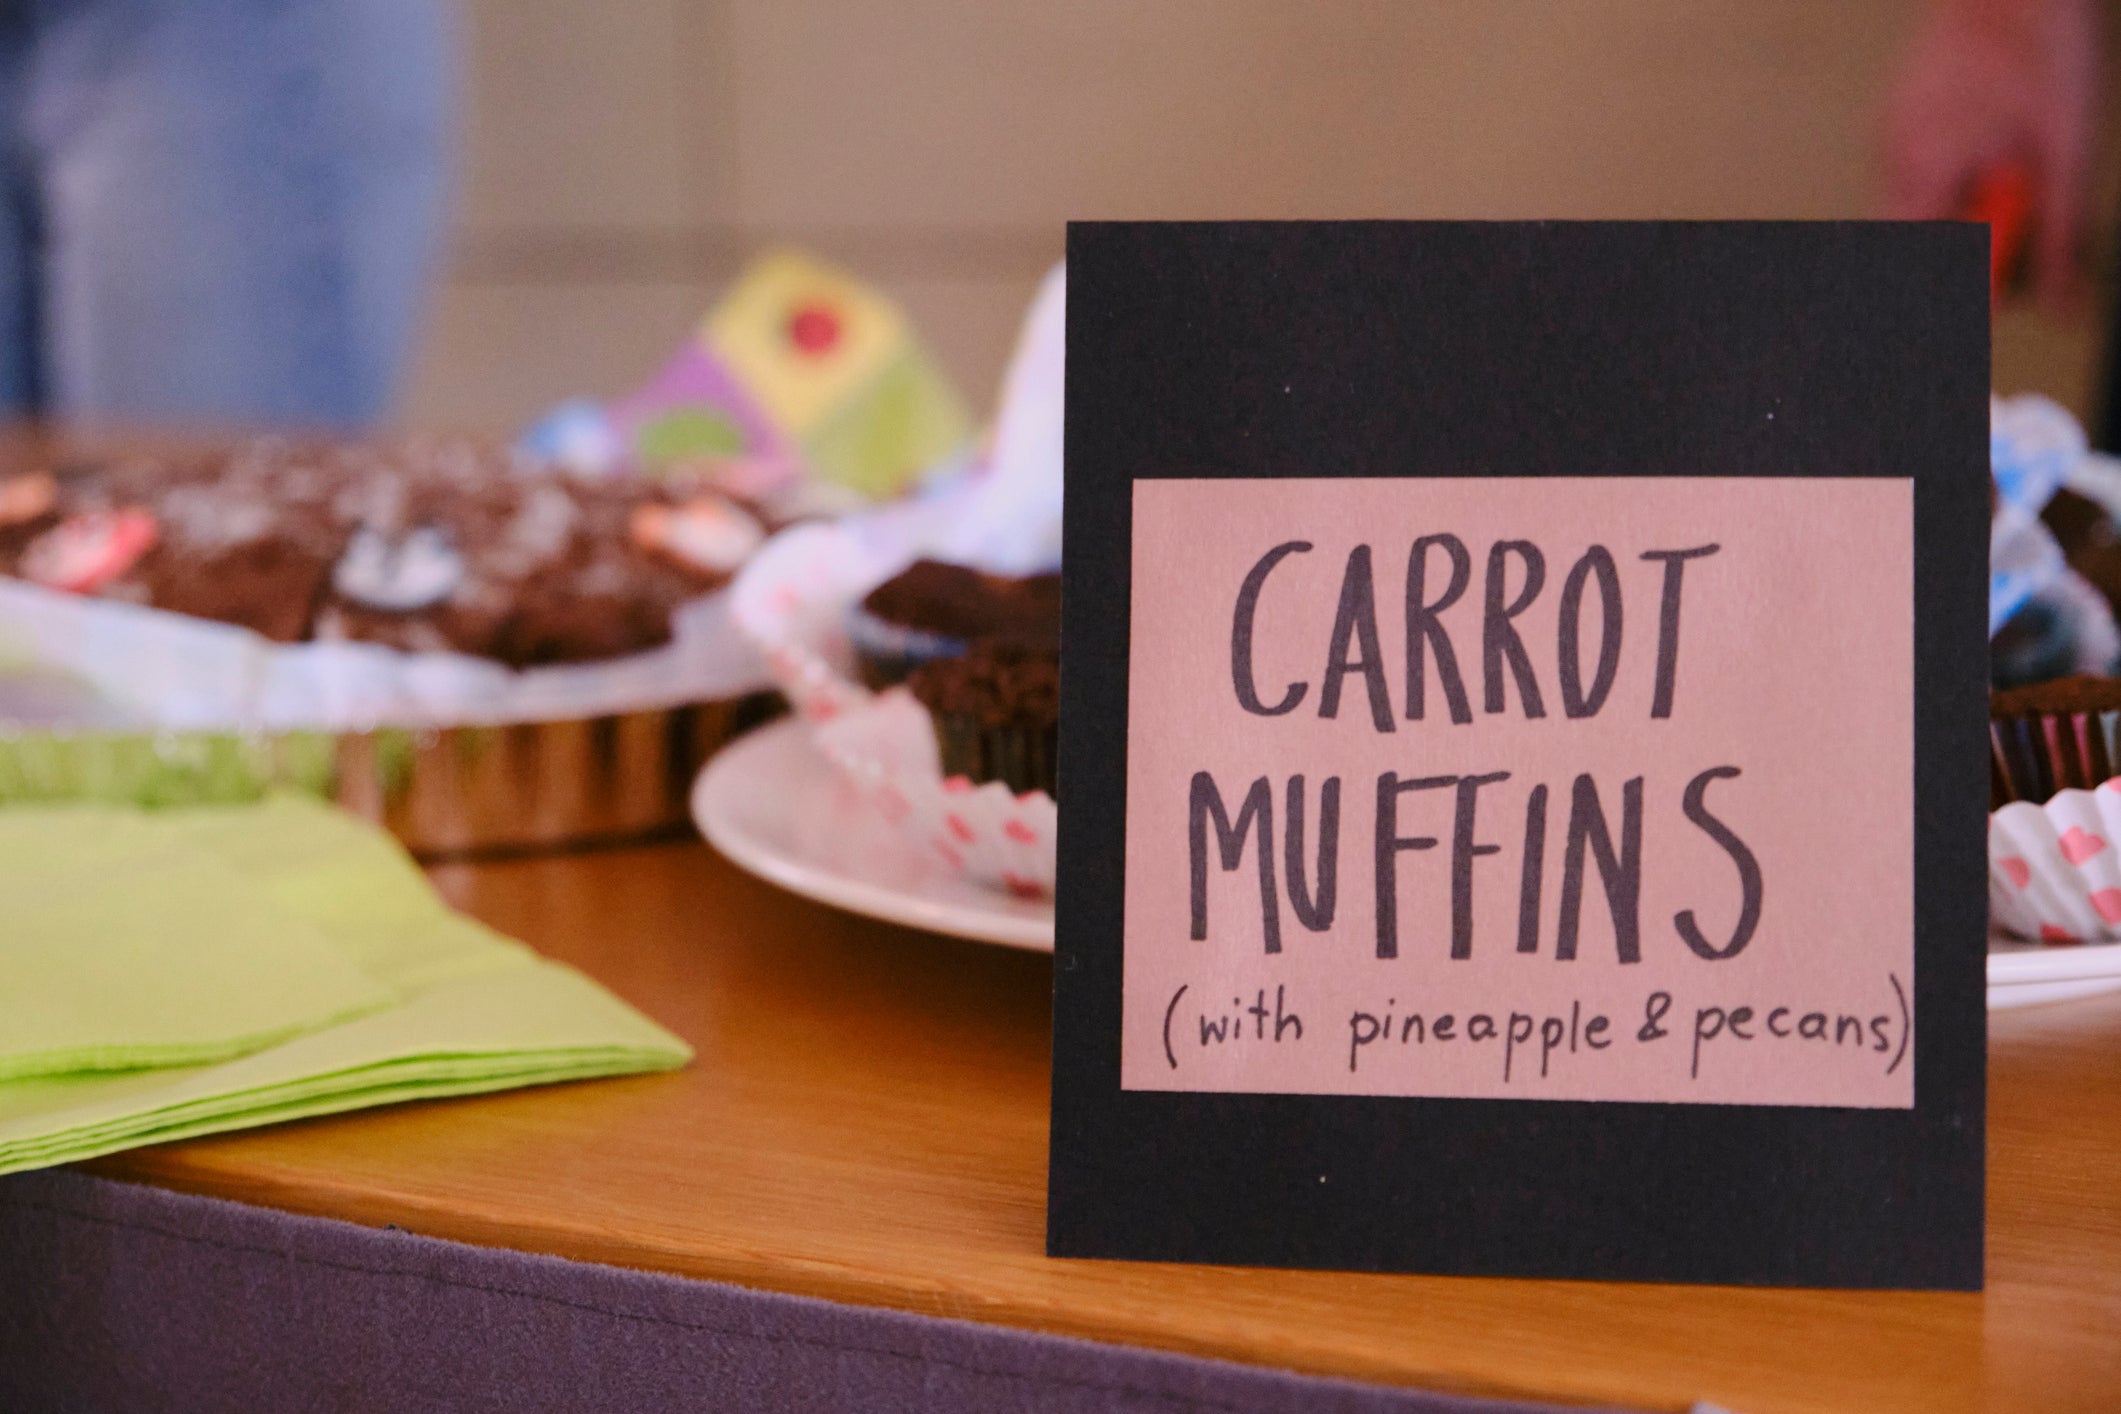 carrot muffins sign on a school bake sale table